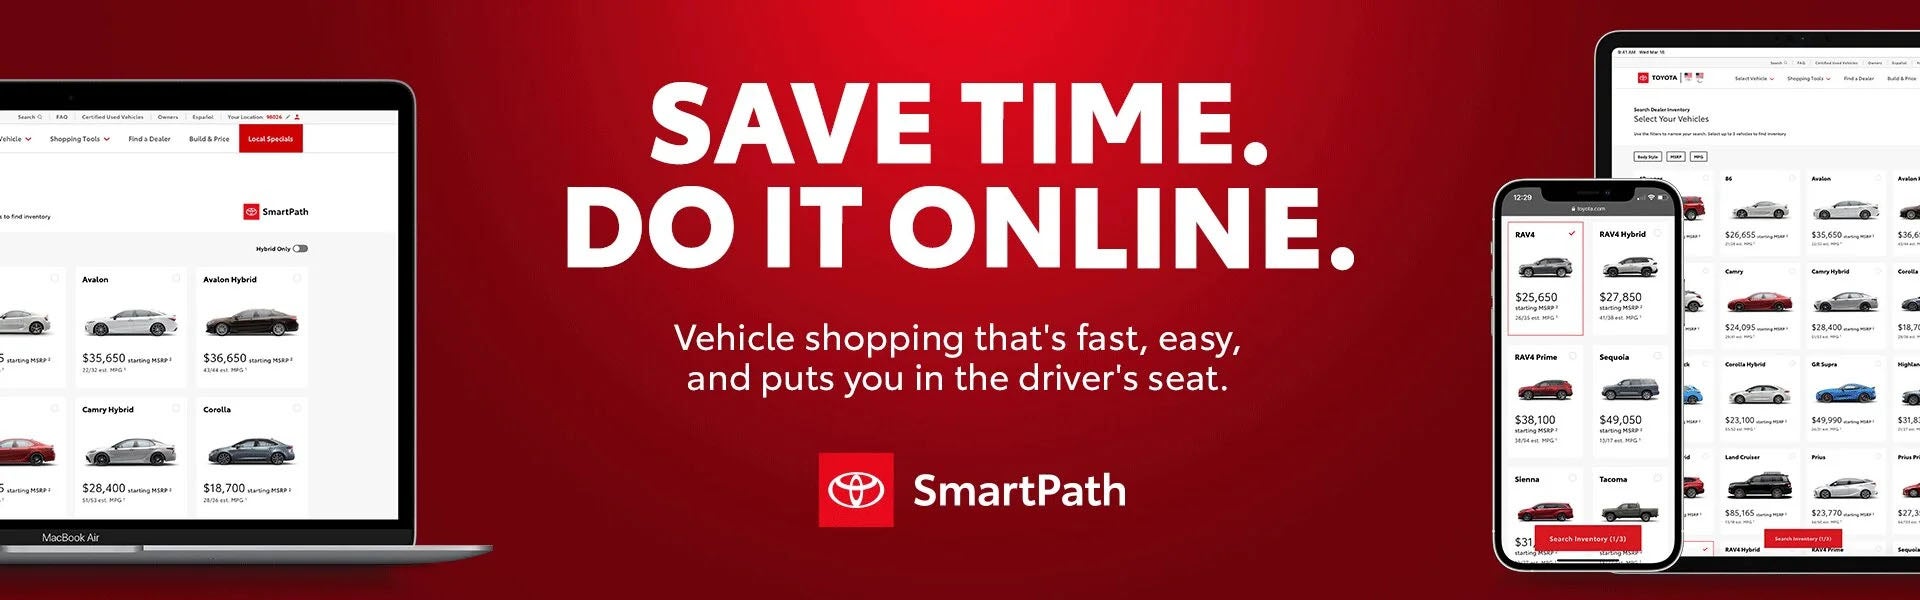 SmartPath to help make car shopping easy.